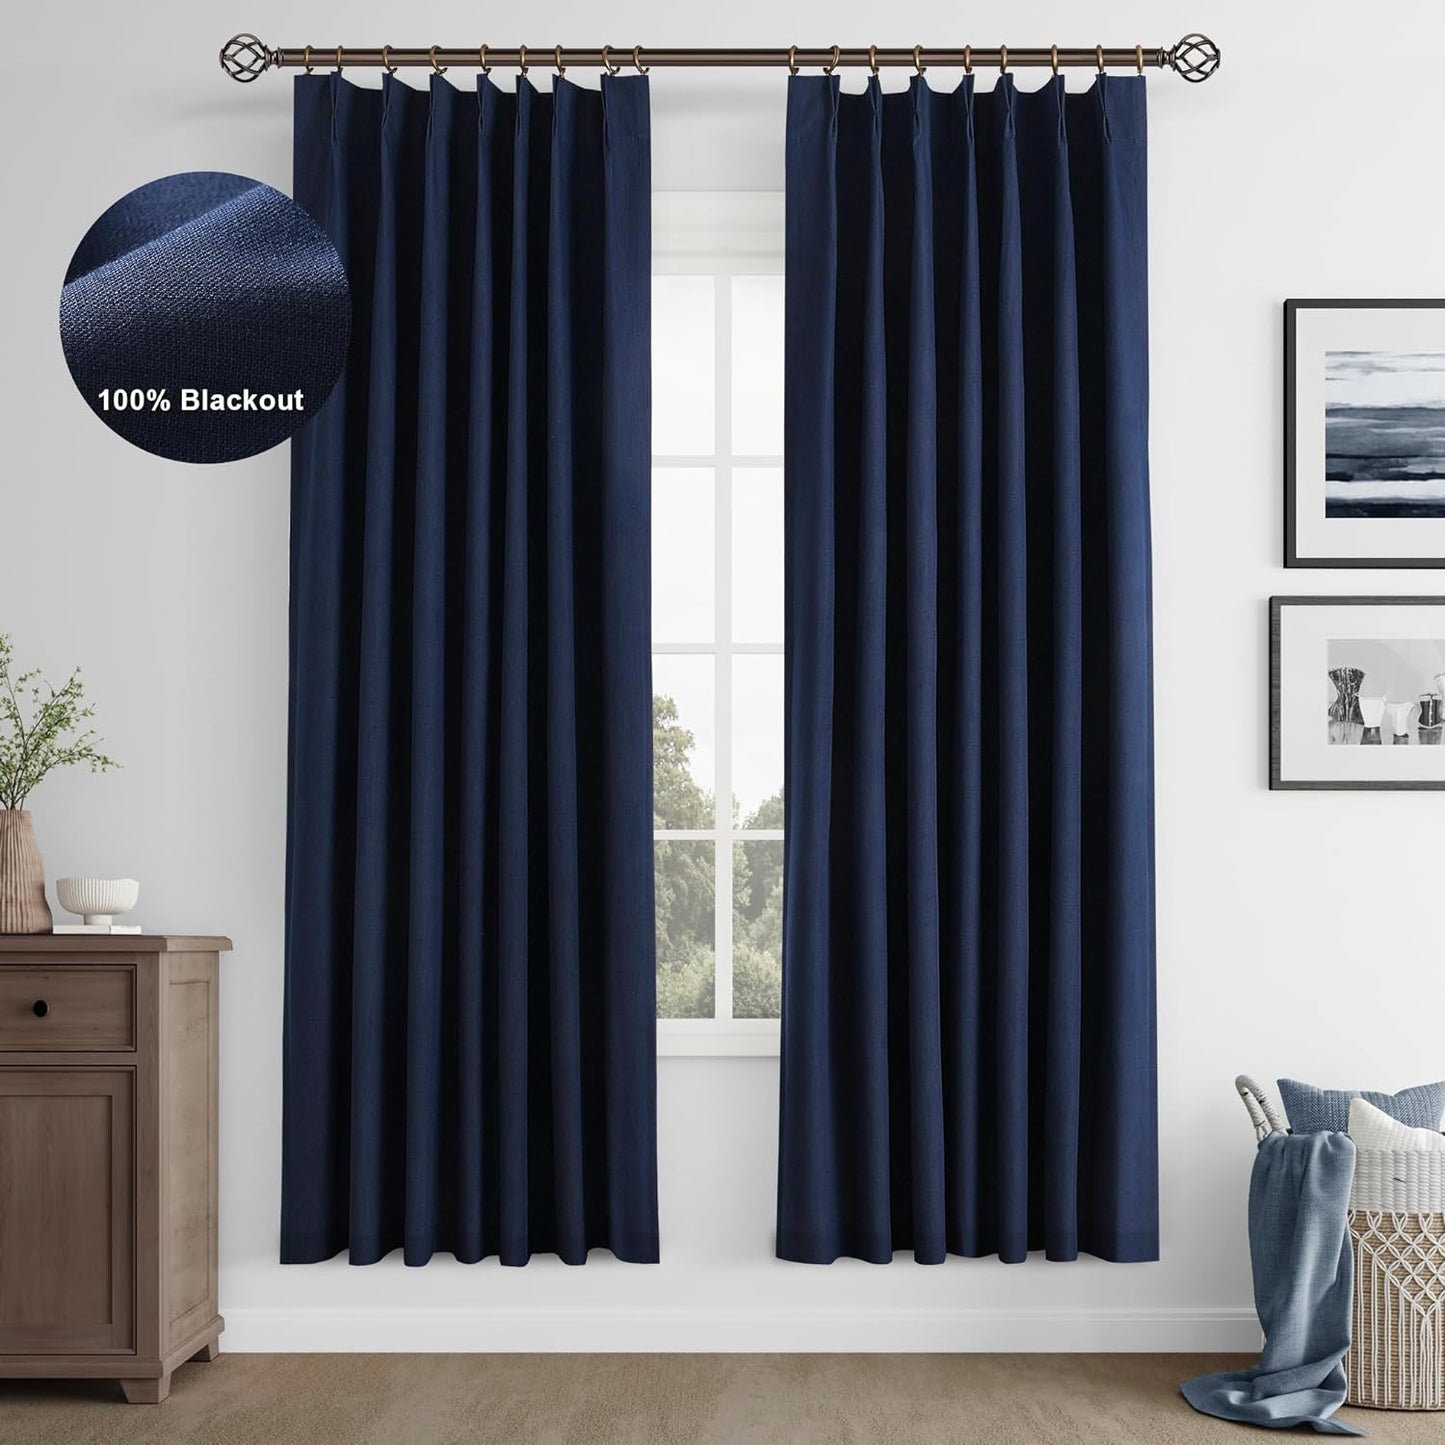 Joywell Cream Ivory Linen 100% Blackout Curtains 84 Inches Long,Pinch Pleated Back Tab Drapes with Hooks Light Blocking Thermal Insulated for Bedroom Living Room,W40 X L84,Natural Beige,2 Panels  Joywell Navy Blue 40W X 78L Inch X 2 Panels 